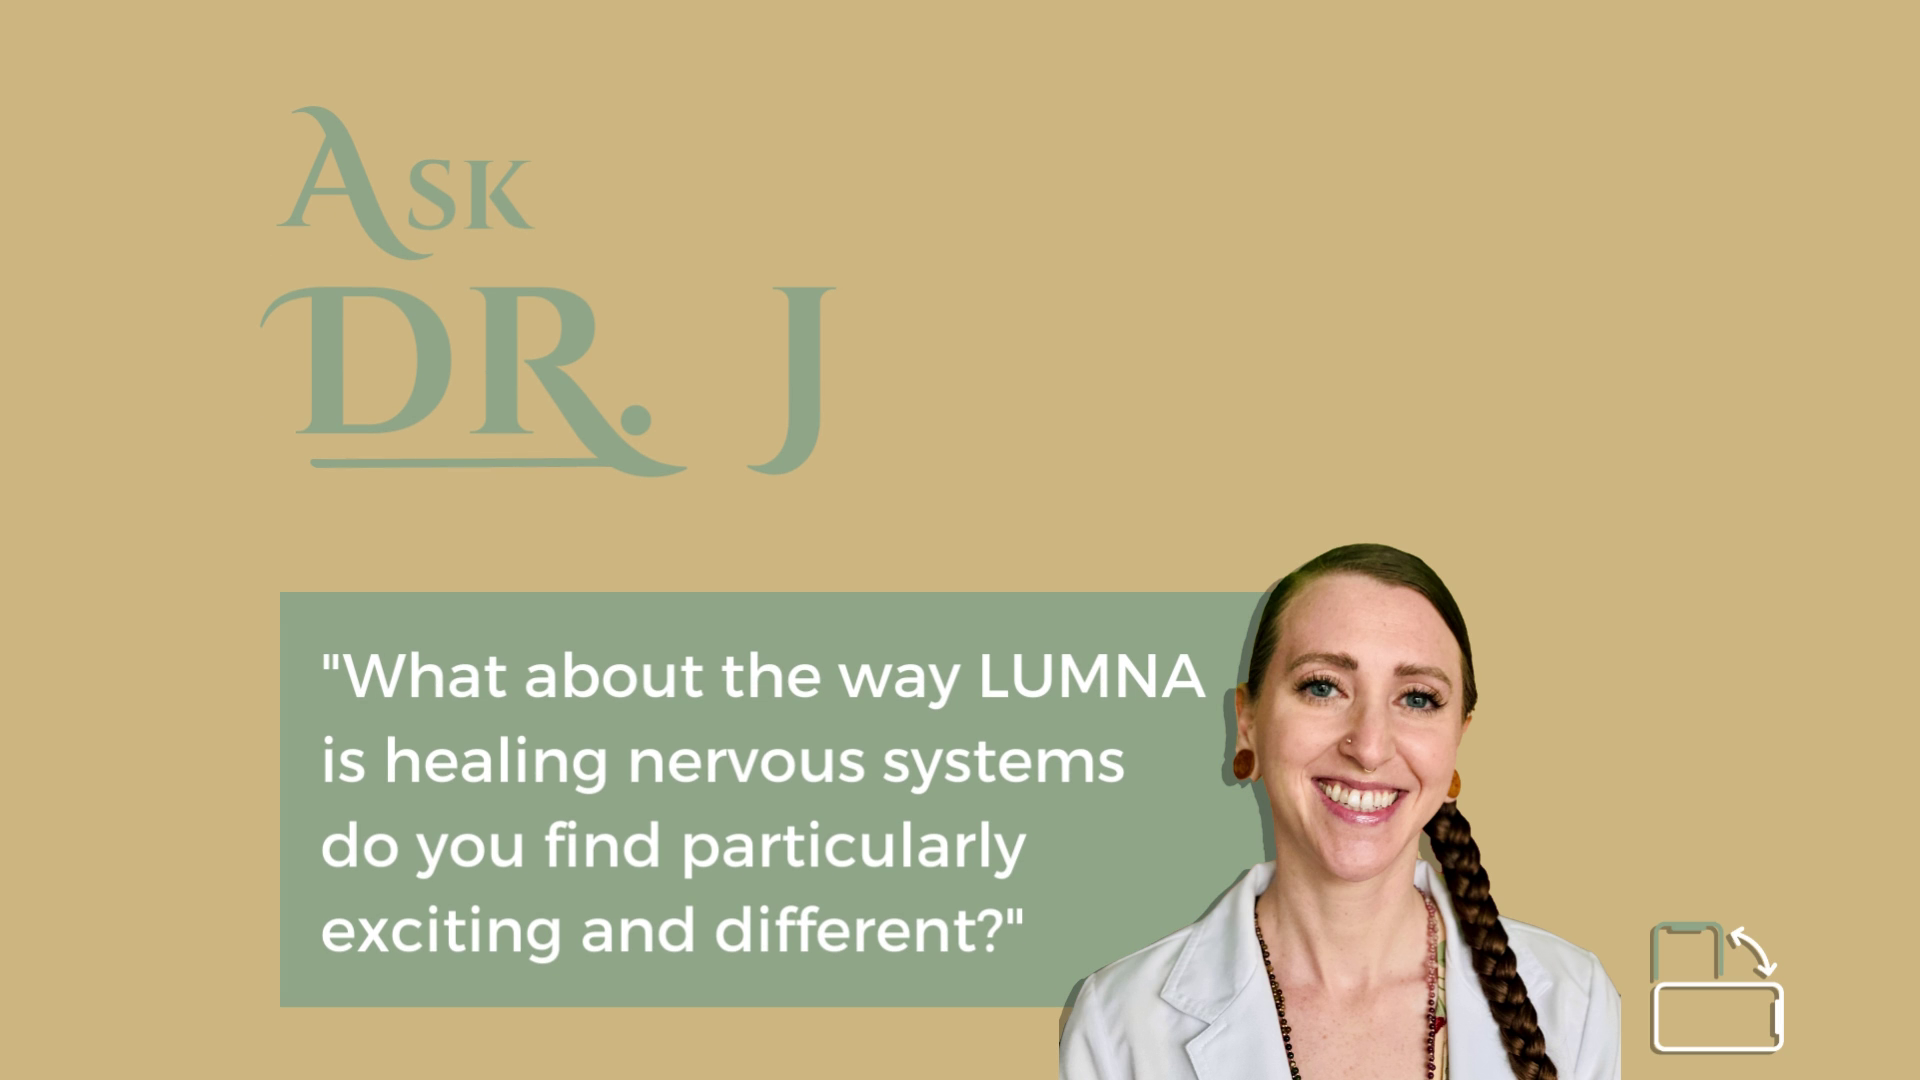 Load video: What about the way LUMNA is healing nervous systems do you find particularly exciting and different?